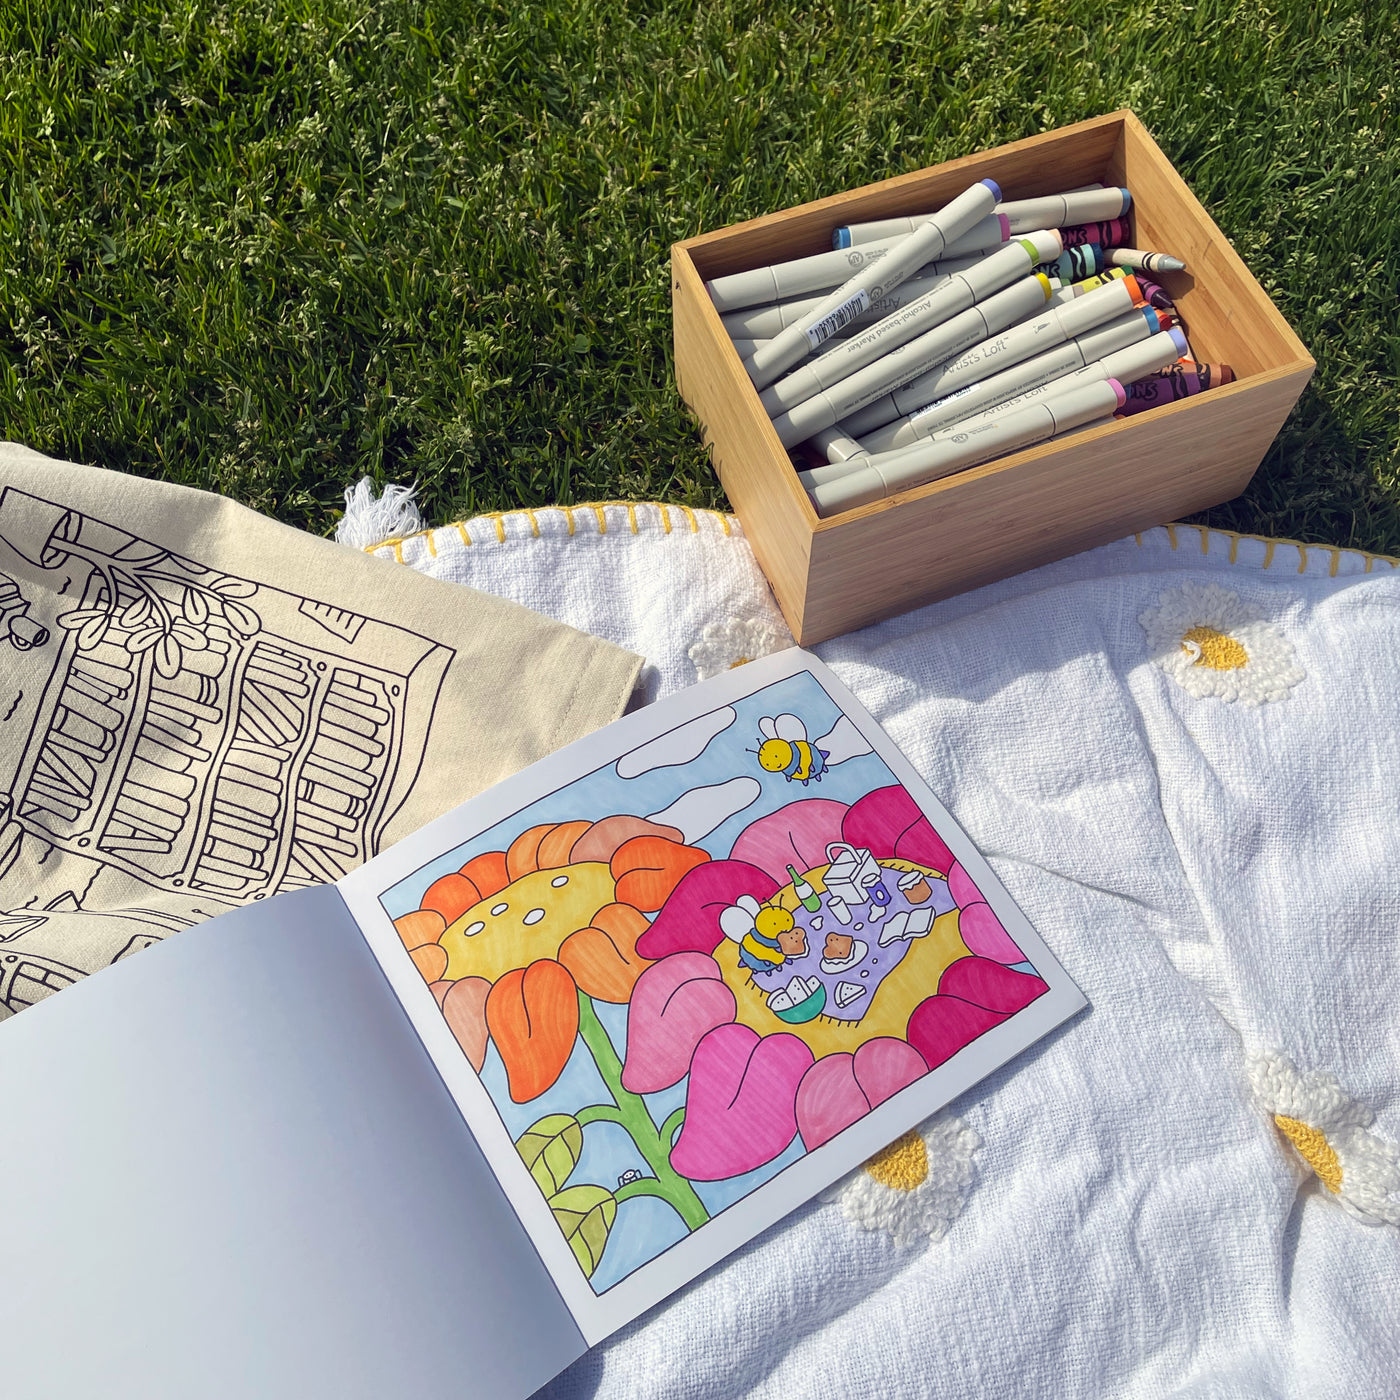 Bobbie Goods Coloring Book: Stunning Coloring Book with 13